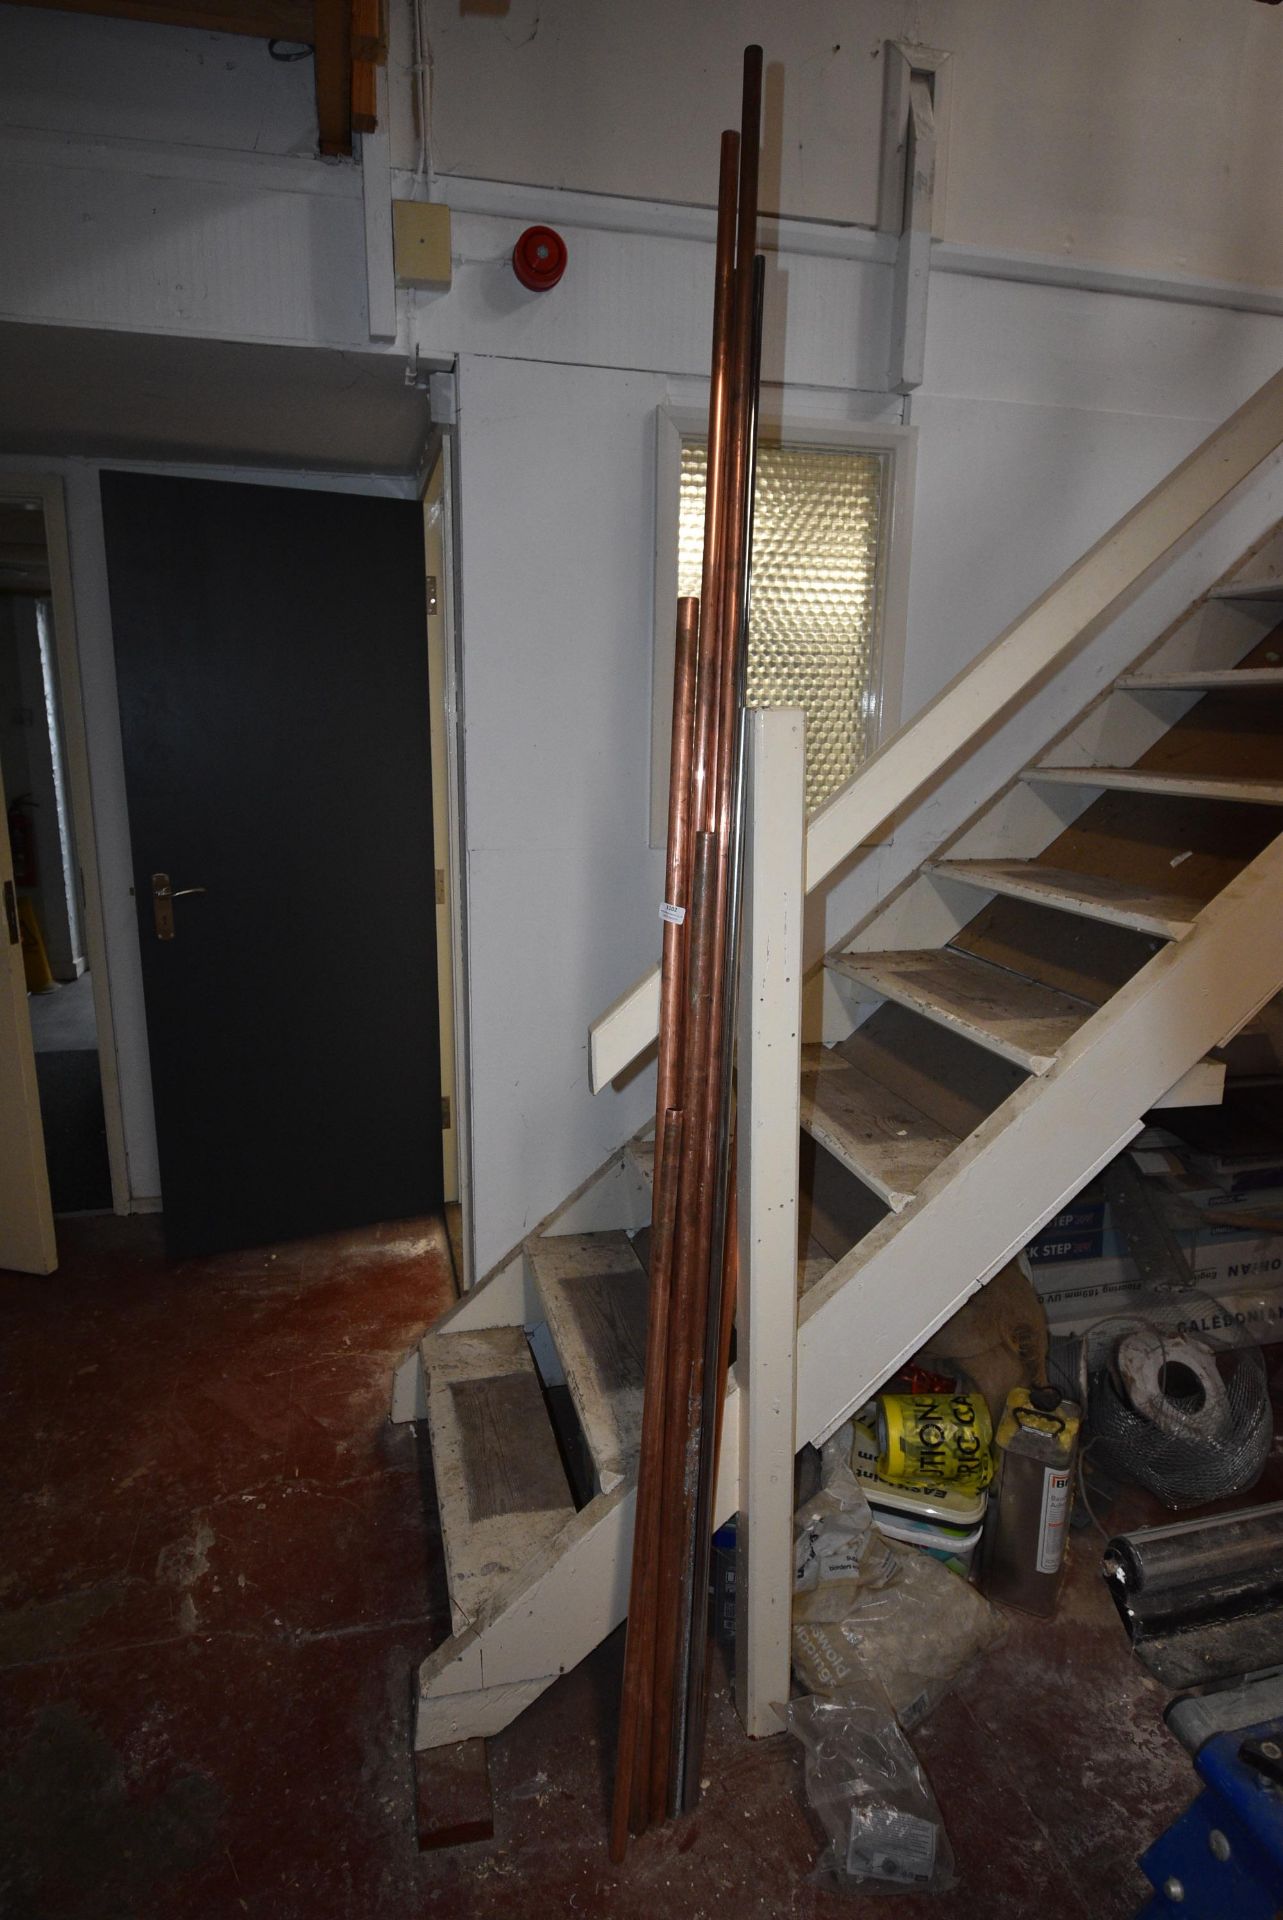 *Copper Tube (Location: 64 King Edward St, Grimsby, DN31 3JP, Viewing Tuesday 26th, 10am - 2pm)